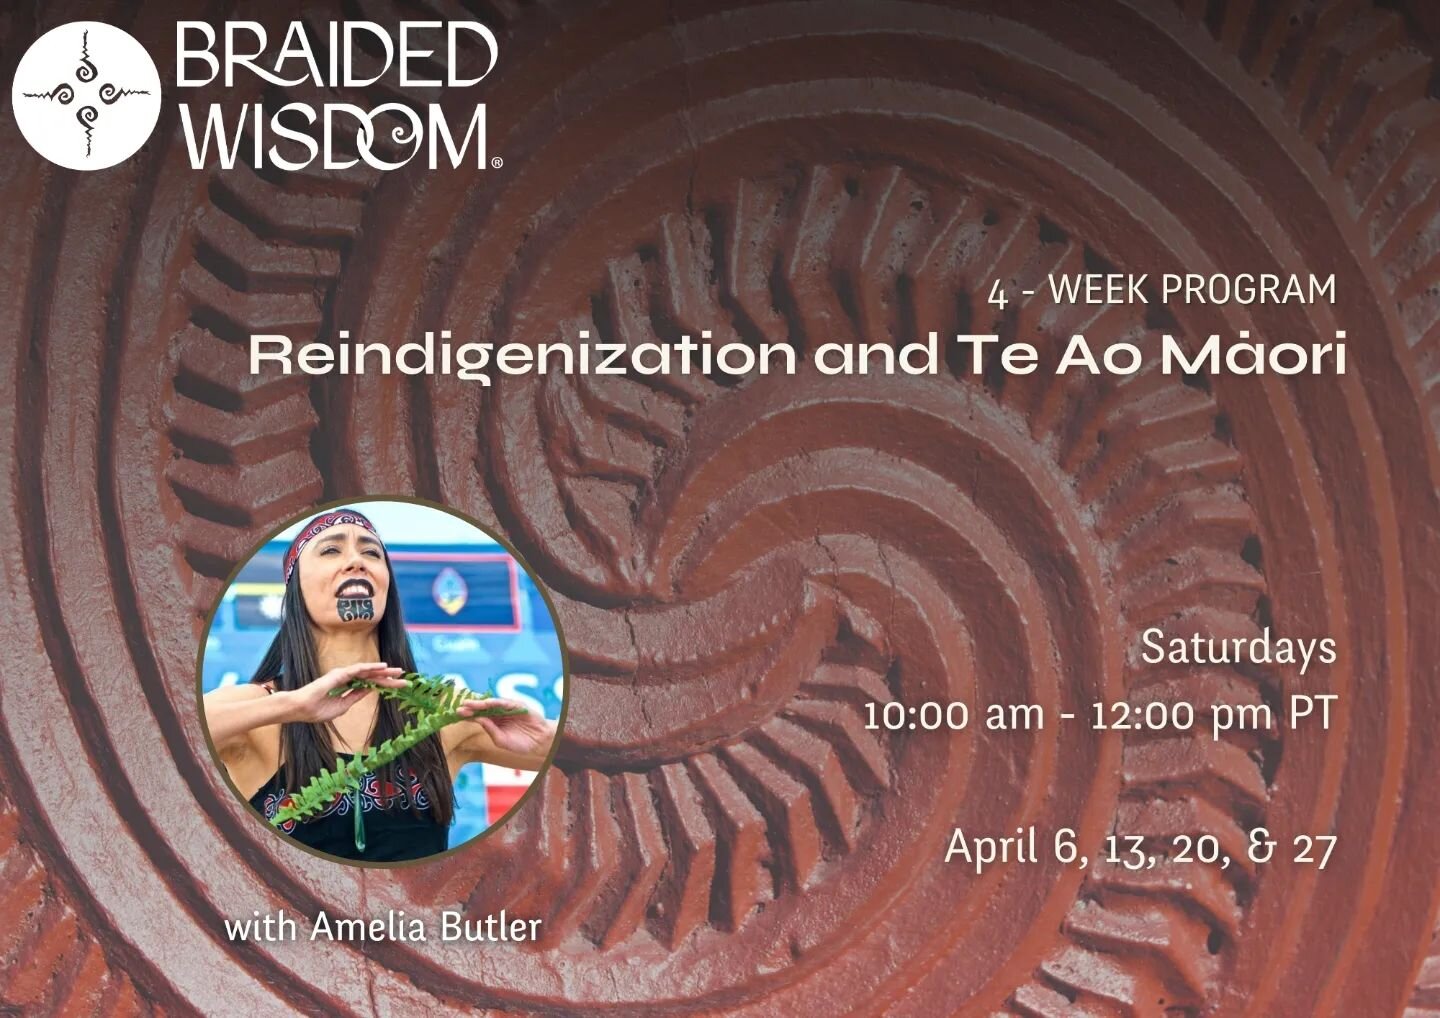 Join us for Reindigenization &amp; Te Ao Māori with Amelia Butler! 

The program begins April 6th from 10:00 am - 12:00 pm PT and runs weekly on Saturdays through the end of April. 

What is reindigenization? How is it different from decolonization? 